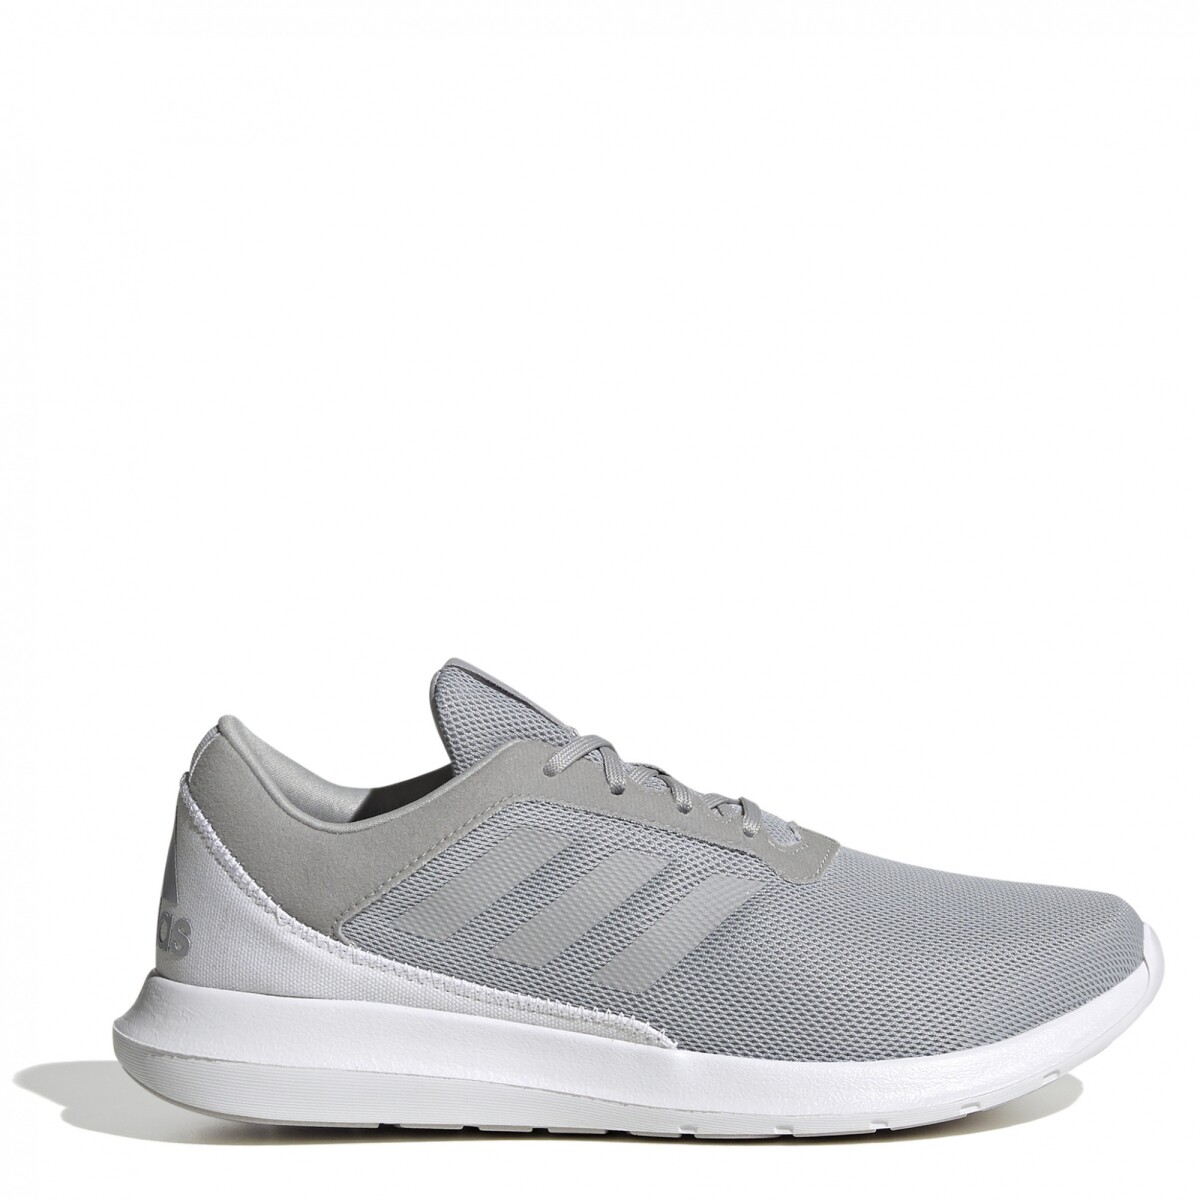 Core Racer Wns Adidas - Gris/Blanco 